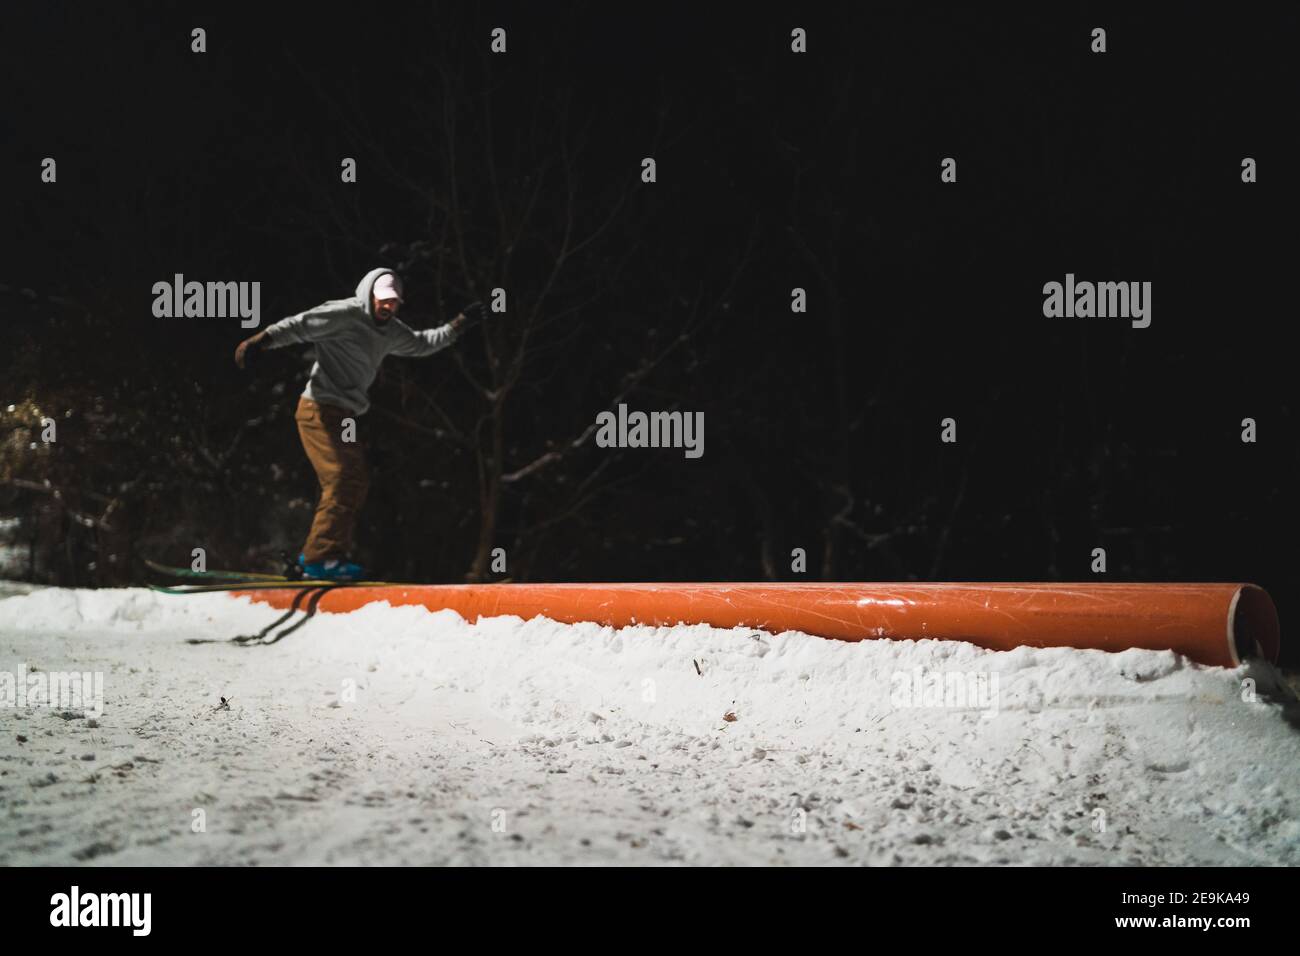 Freestyle skier doing tricks on rails in city park Stock Photo